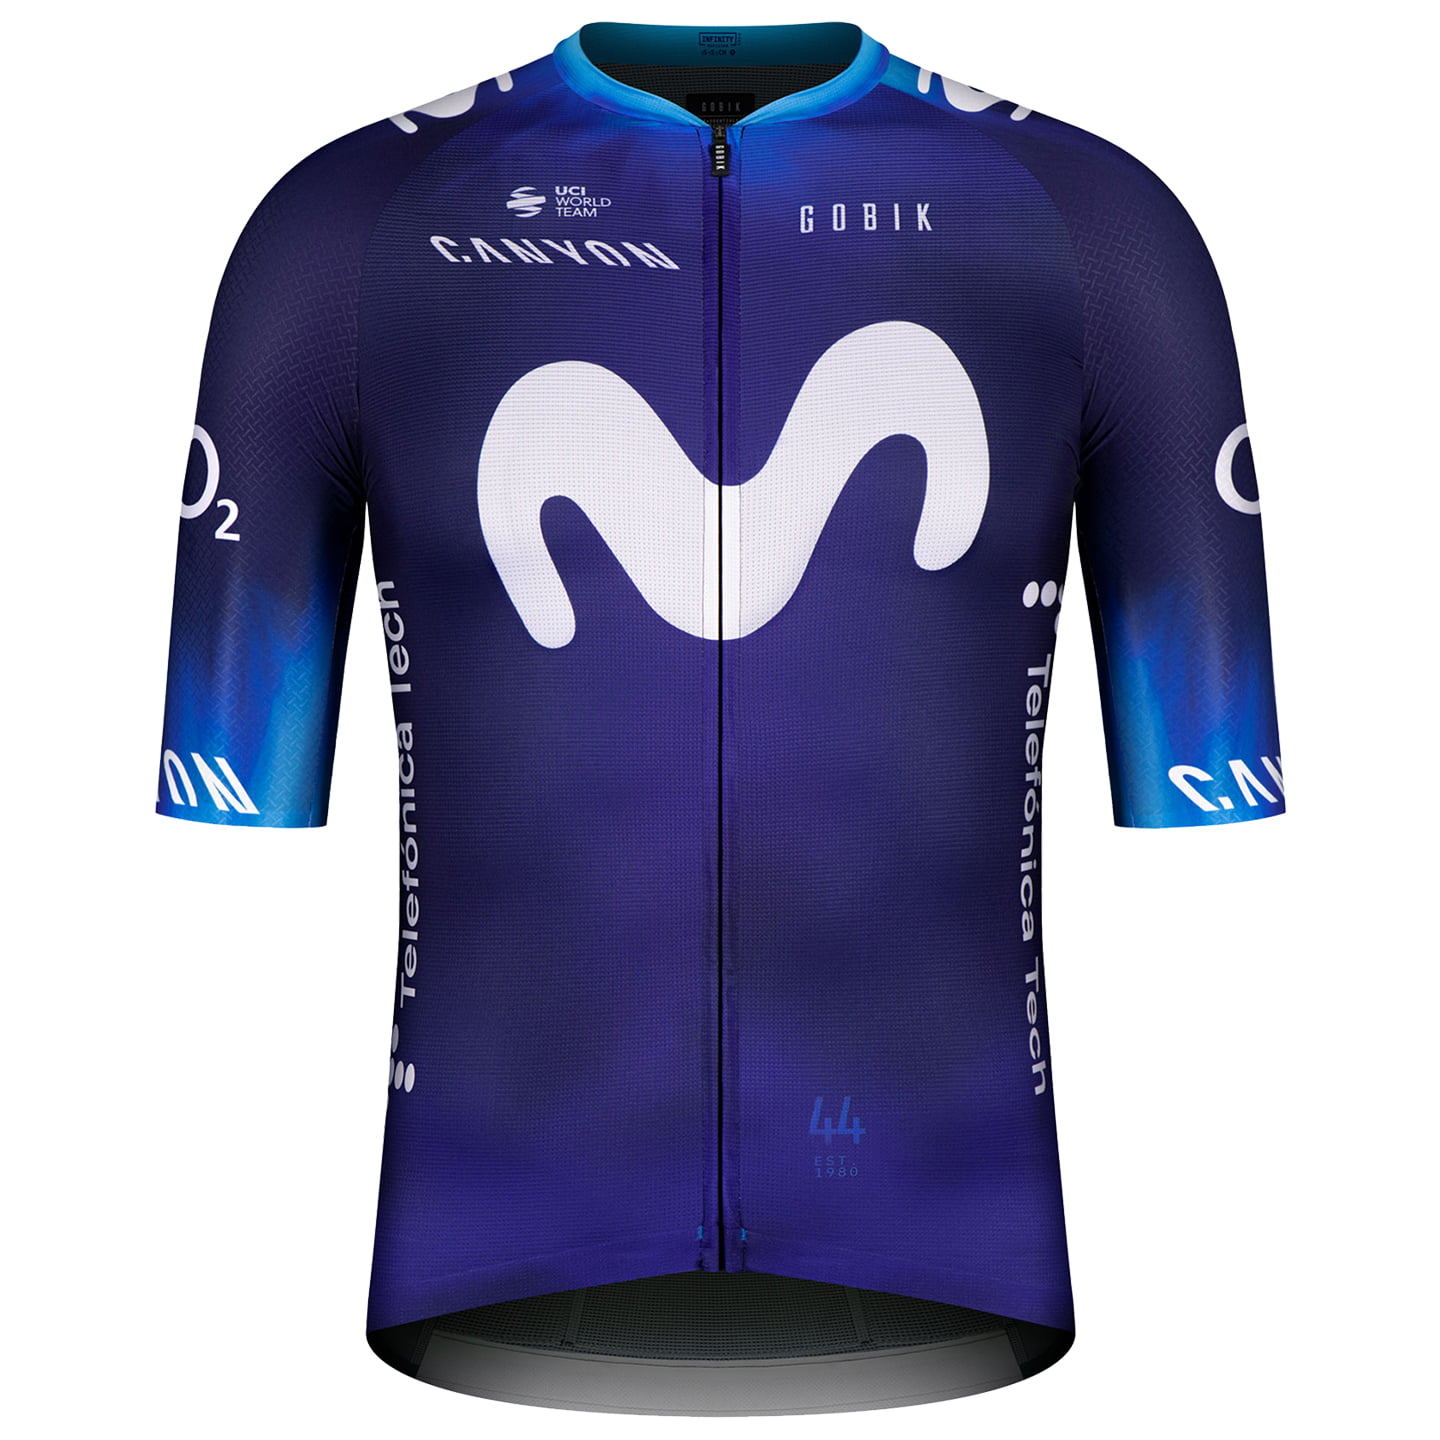 MOVISTAR TEAM Race 2023 Short Sleeve Jersey, for men, size M, Cycle jersey, Cycling clothing